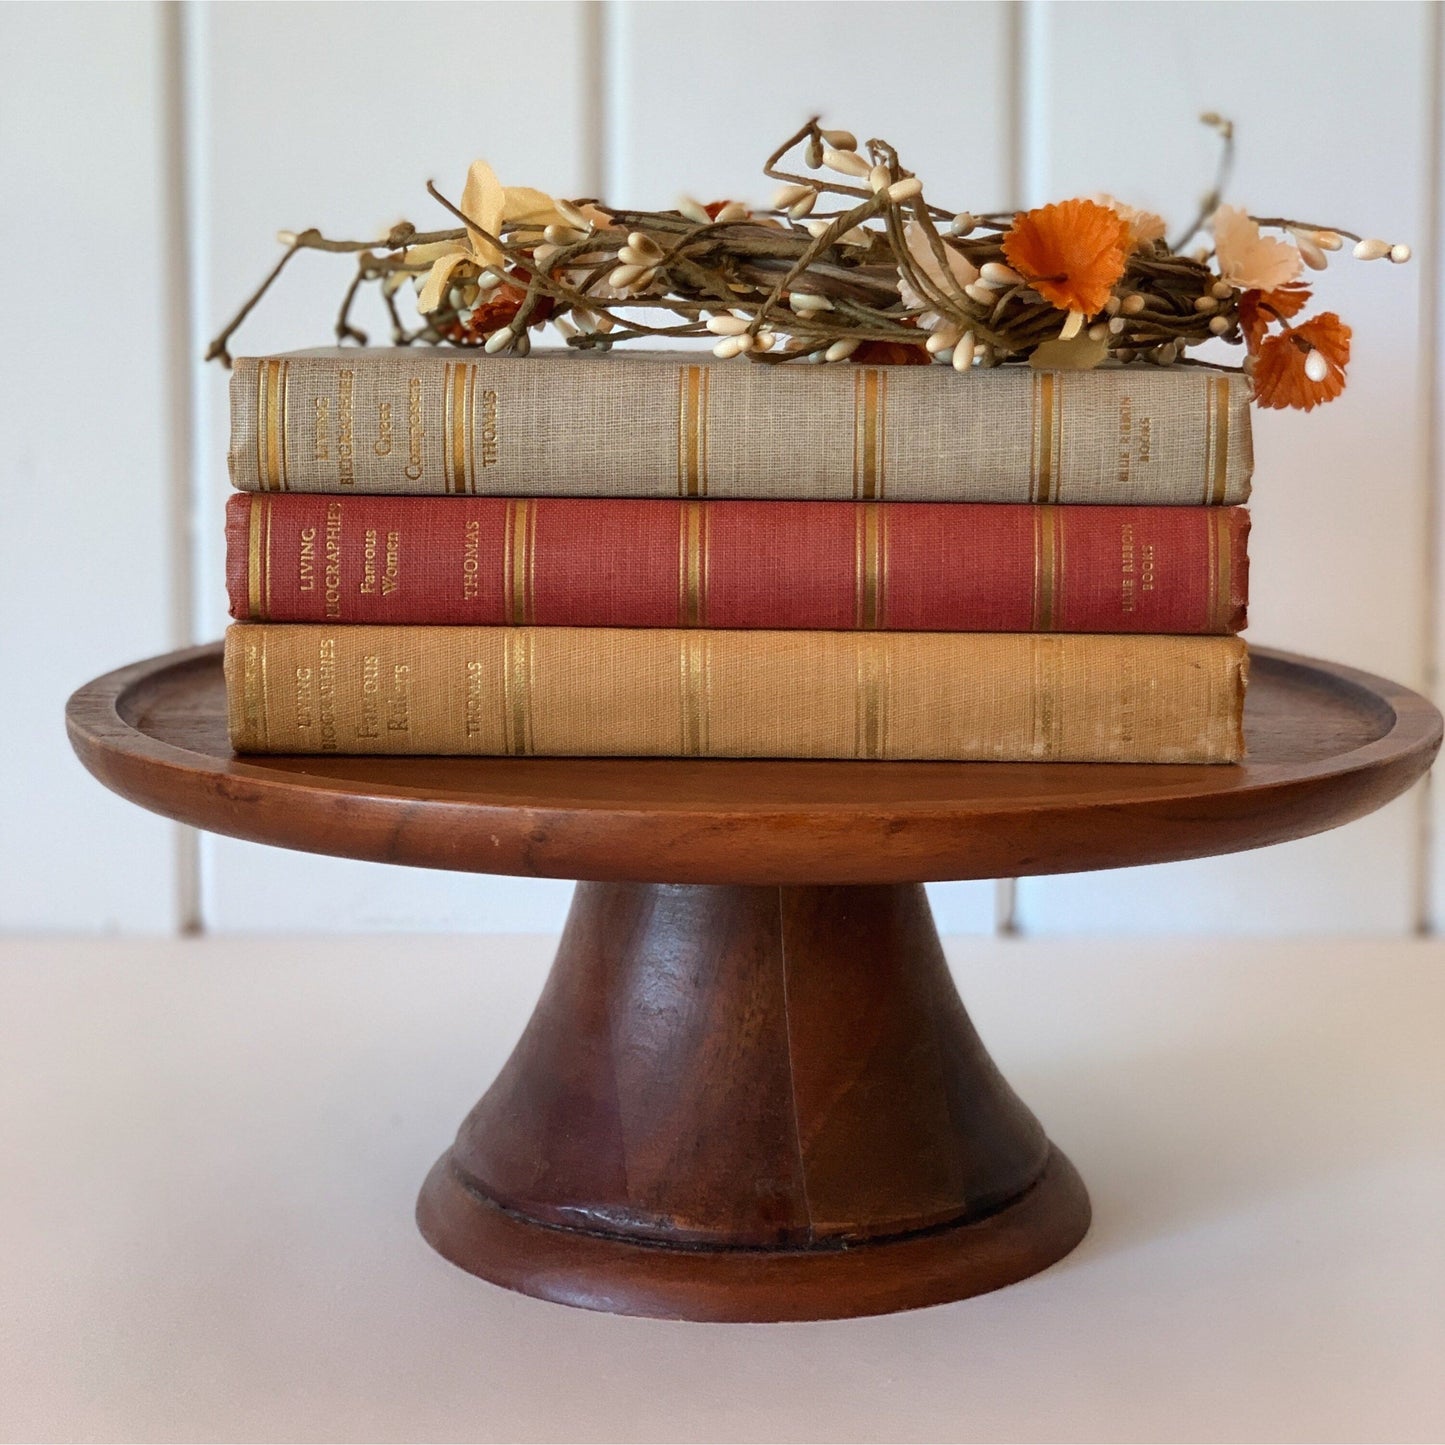 Copper Rust Beige Vintage Book Set, Living Biographies, Fall Colors Books for Shelf Styling